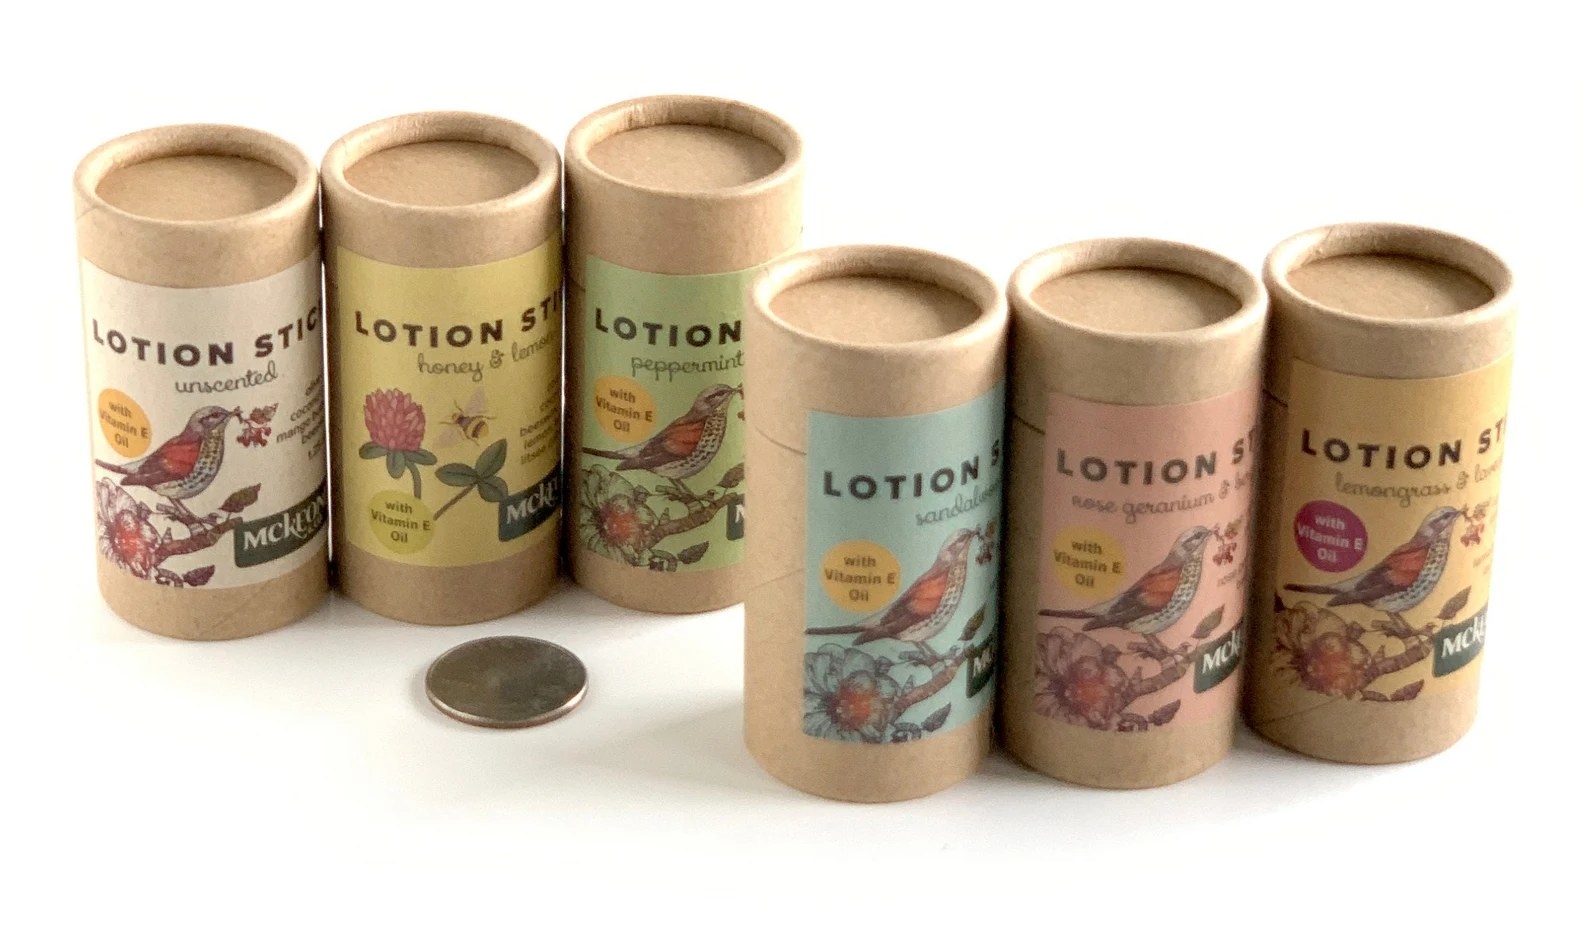 Six of the lotion sticks posed with a quarter for scale